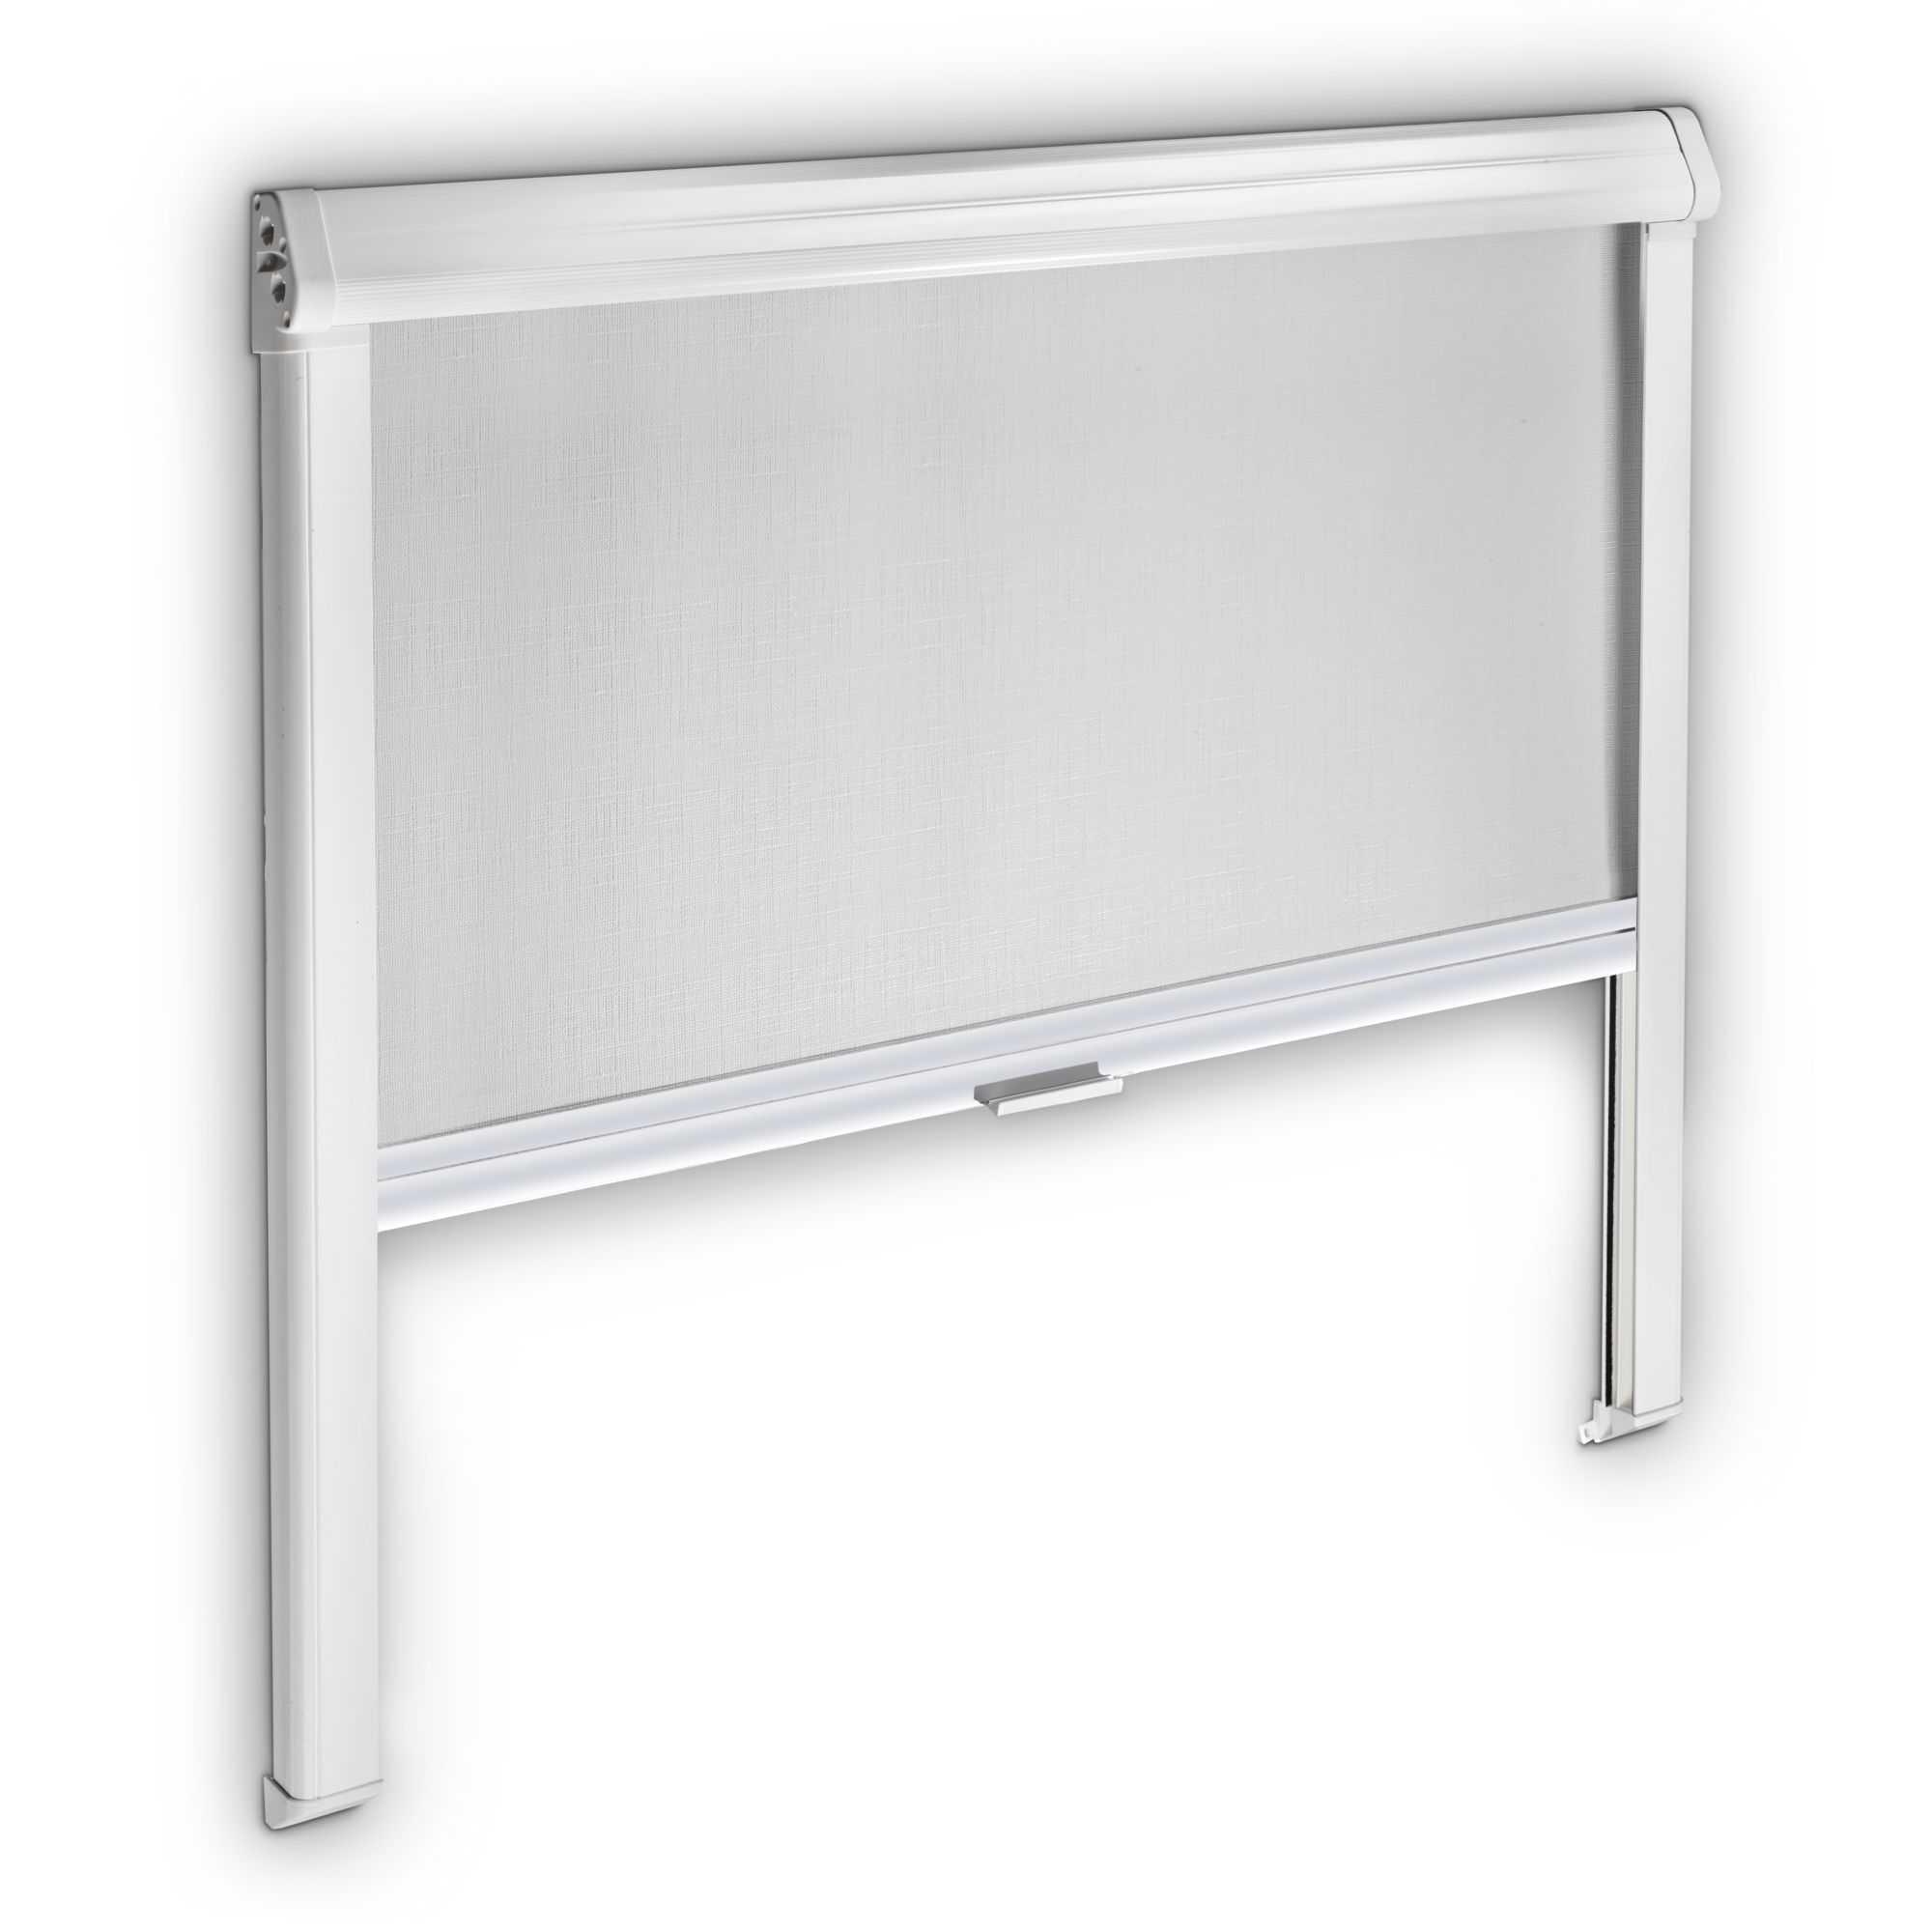 Dometic Black-Out Roller Blind 3000, 760 x 710 mm, traffic-white